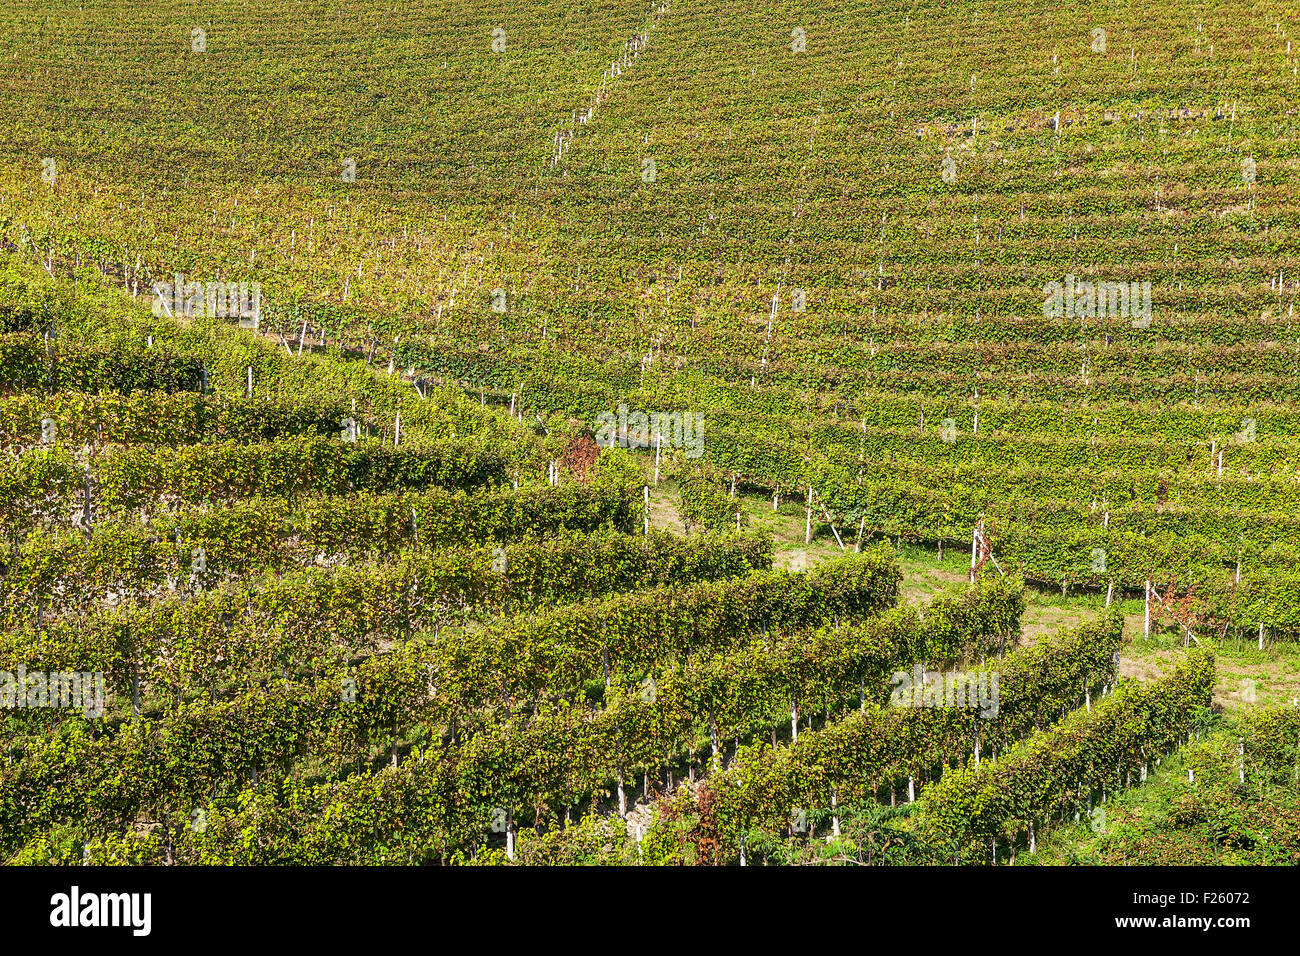 Row of autumnal vineyards in Piedmont, Northern Italy. Stock Photo